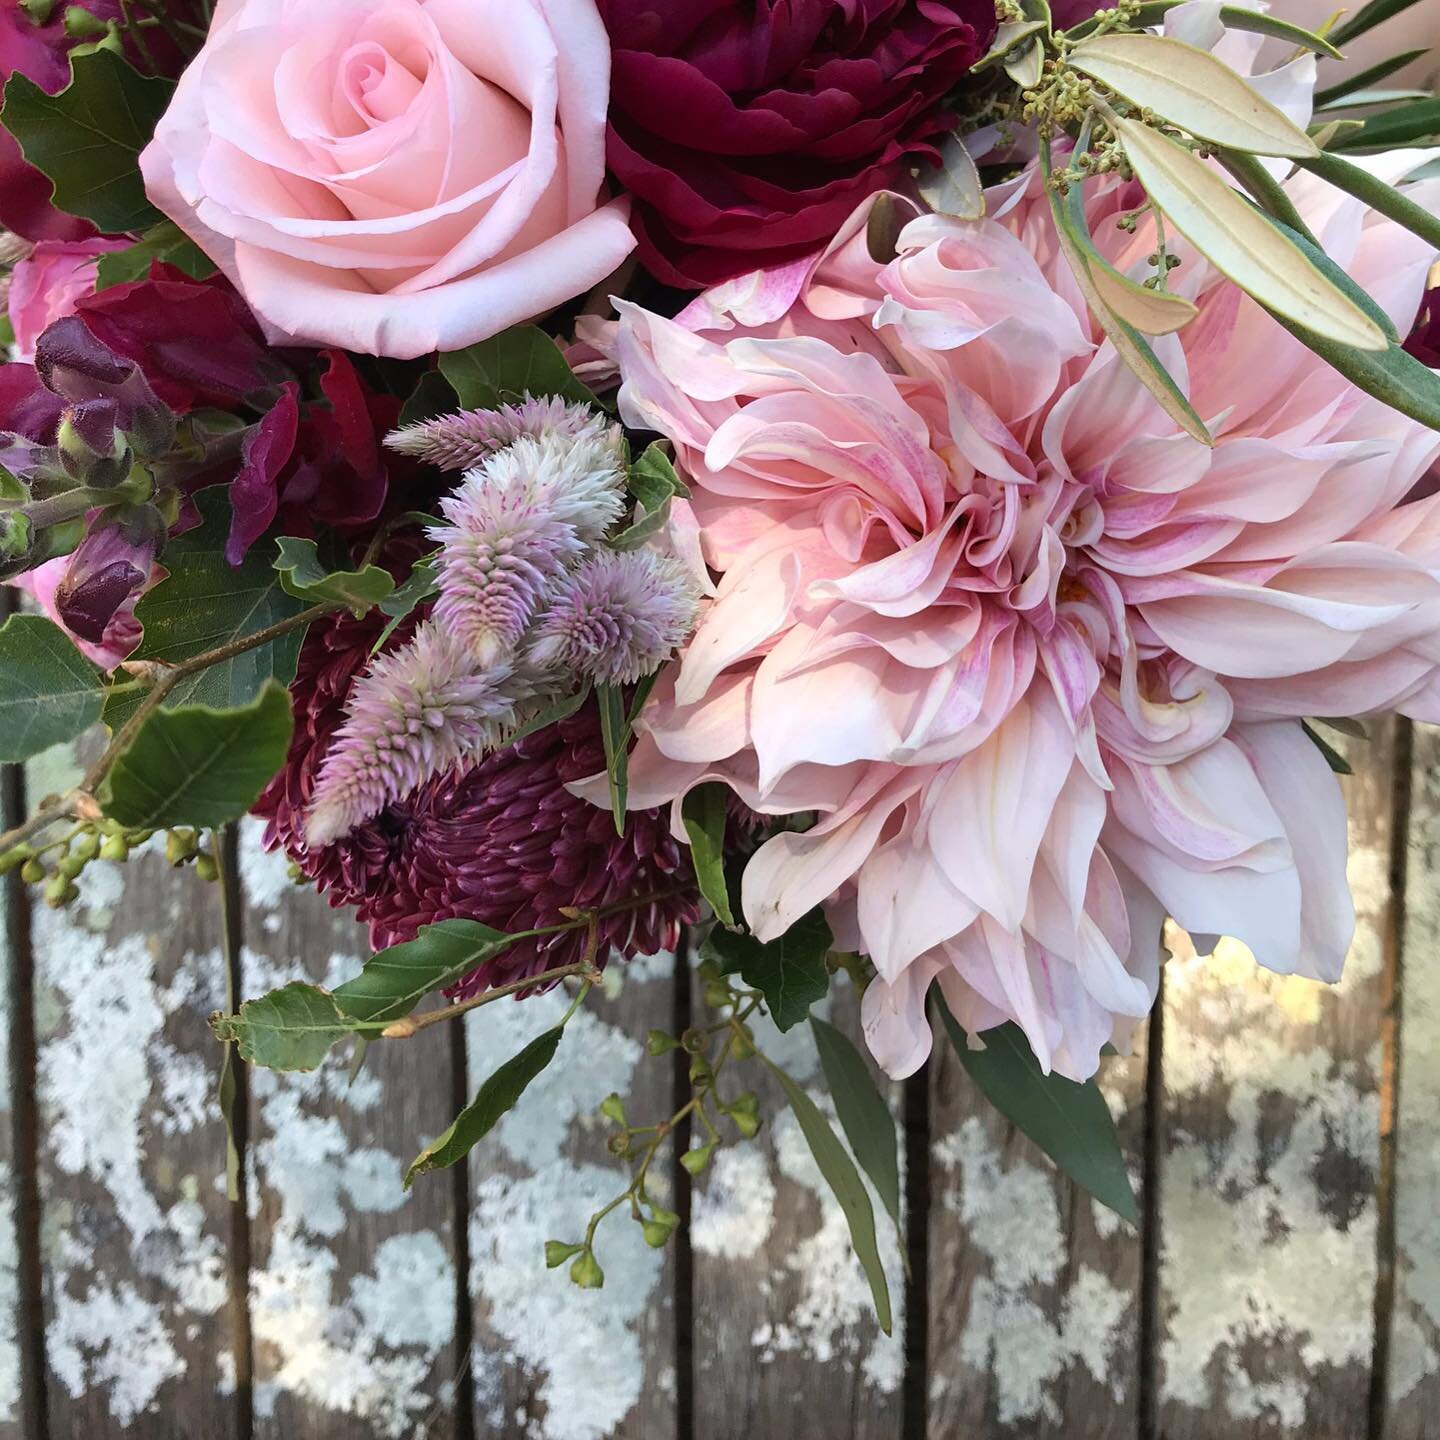 Happy Friday lovers 💕 who&rsquo;s getting all their wedding plans sorted in lockdown? 🙌🏼 
.
.

#sydneyweddings #floristsweddingday #sydneyflorist #sydneyweddingflowers #weddingday #floralstyling #floralstylingsydney 
#weddingstyle #bouquet #brides